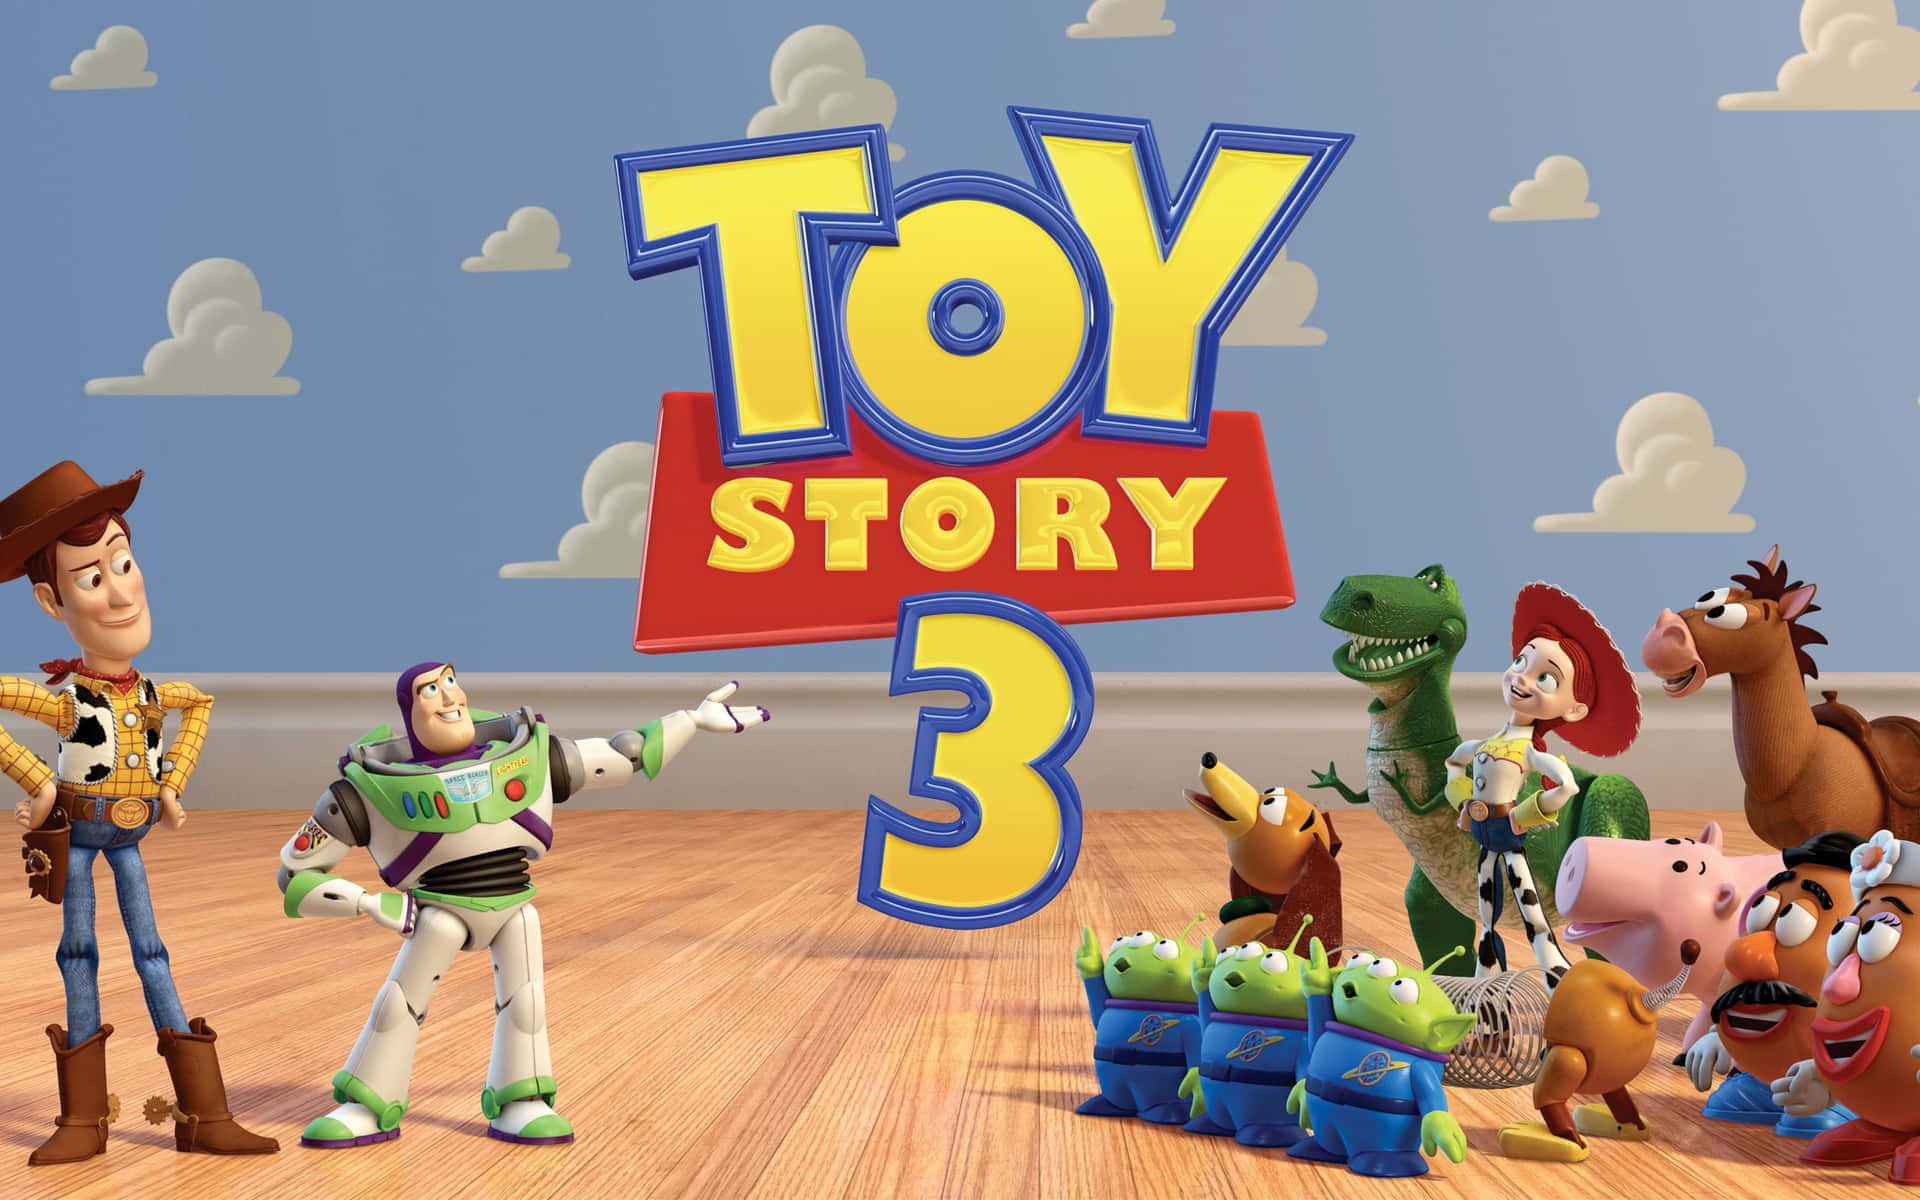 Embark on an Adventure with Toy Story's Cloud Background